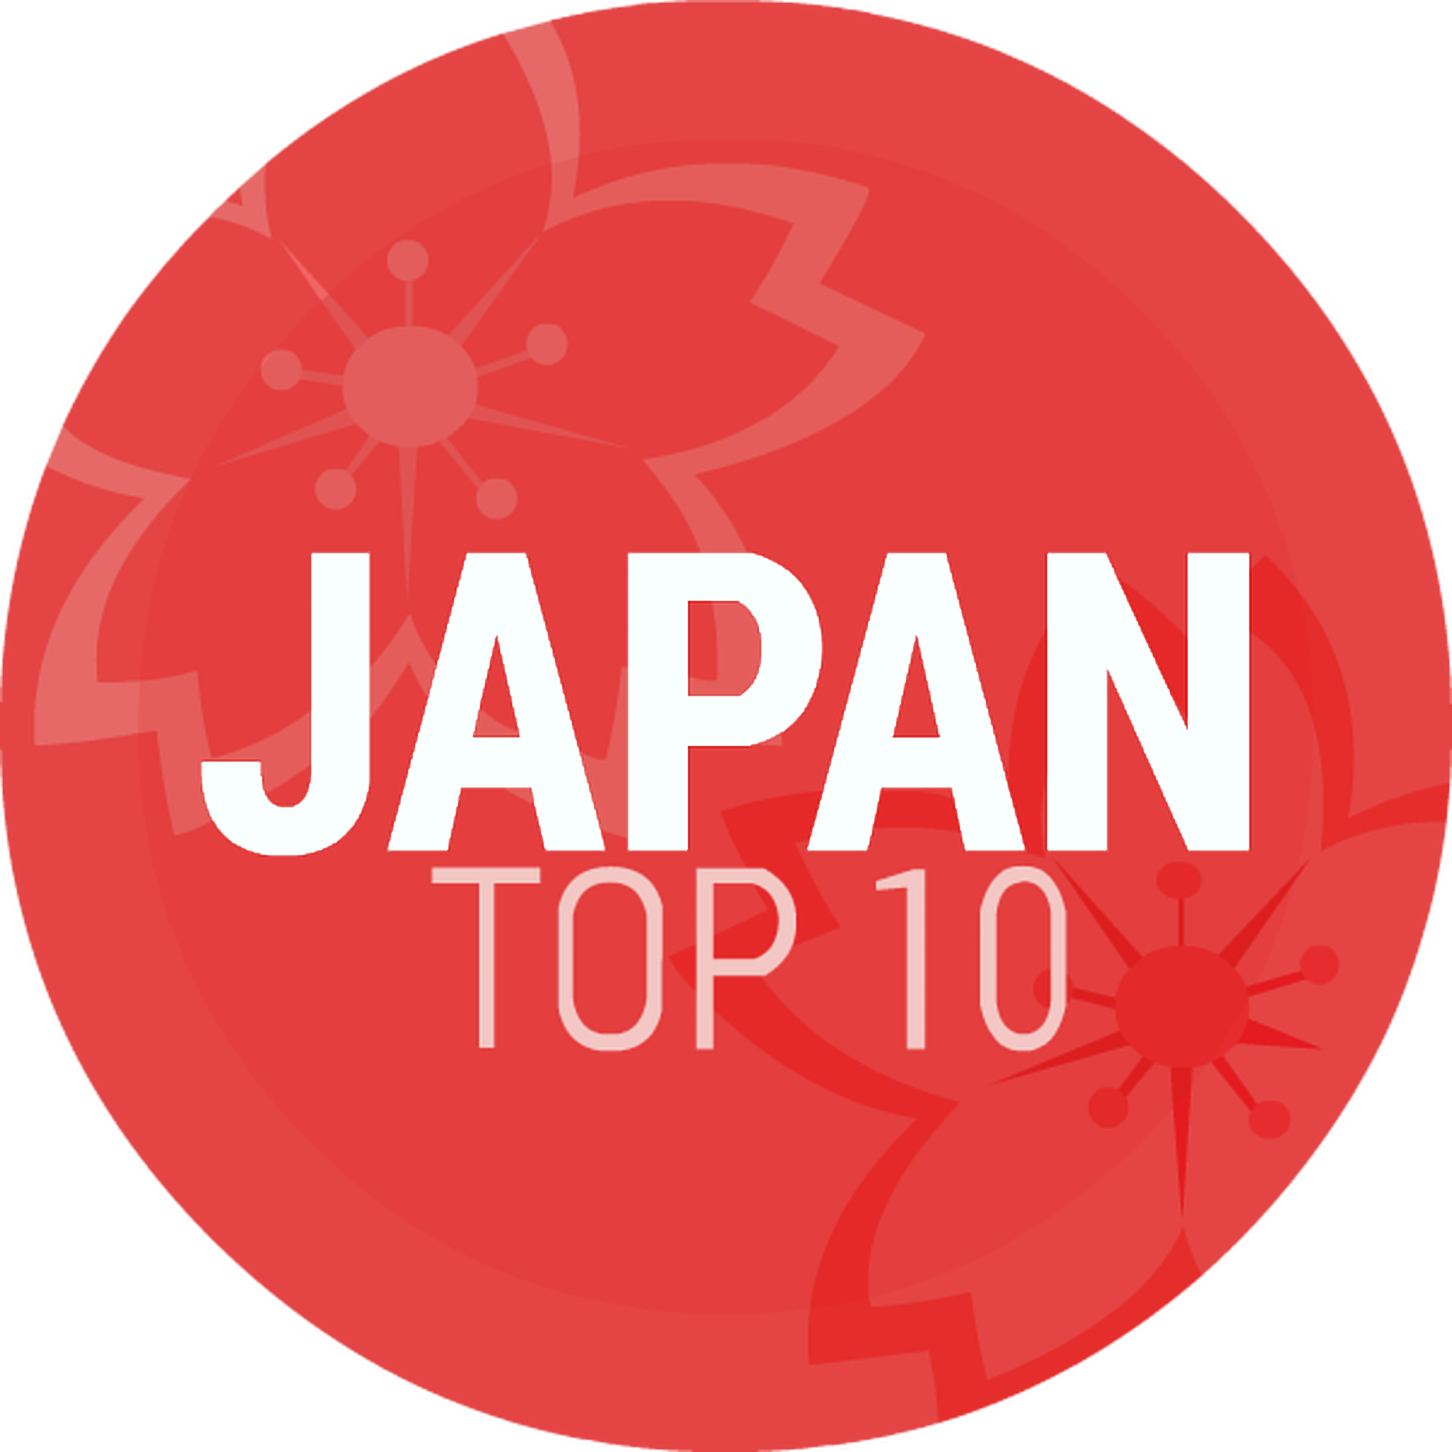 Episode 234: Japan Top 10 May 2018 Special: Best of Moments on Japan Top 10 Since 2013!